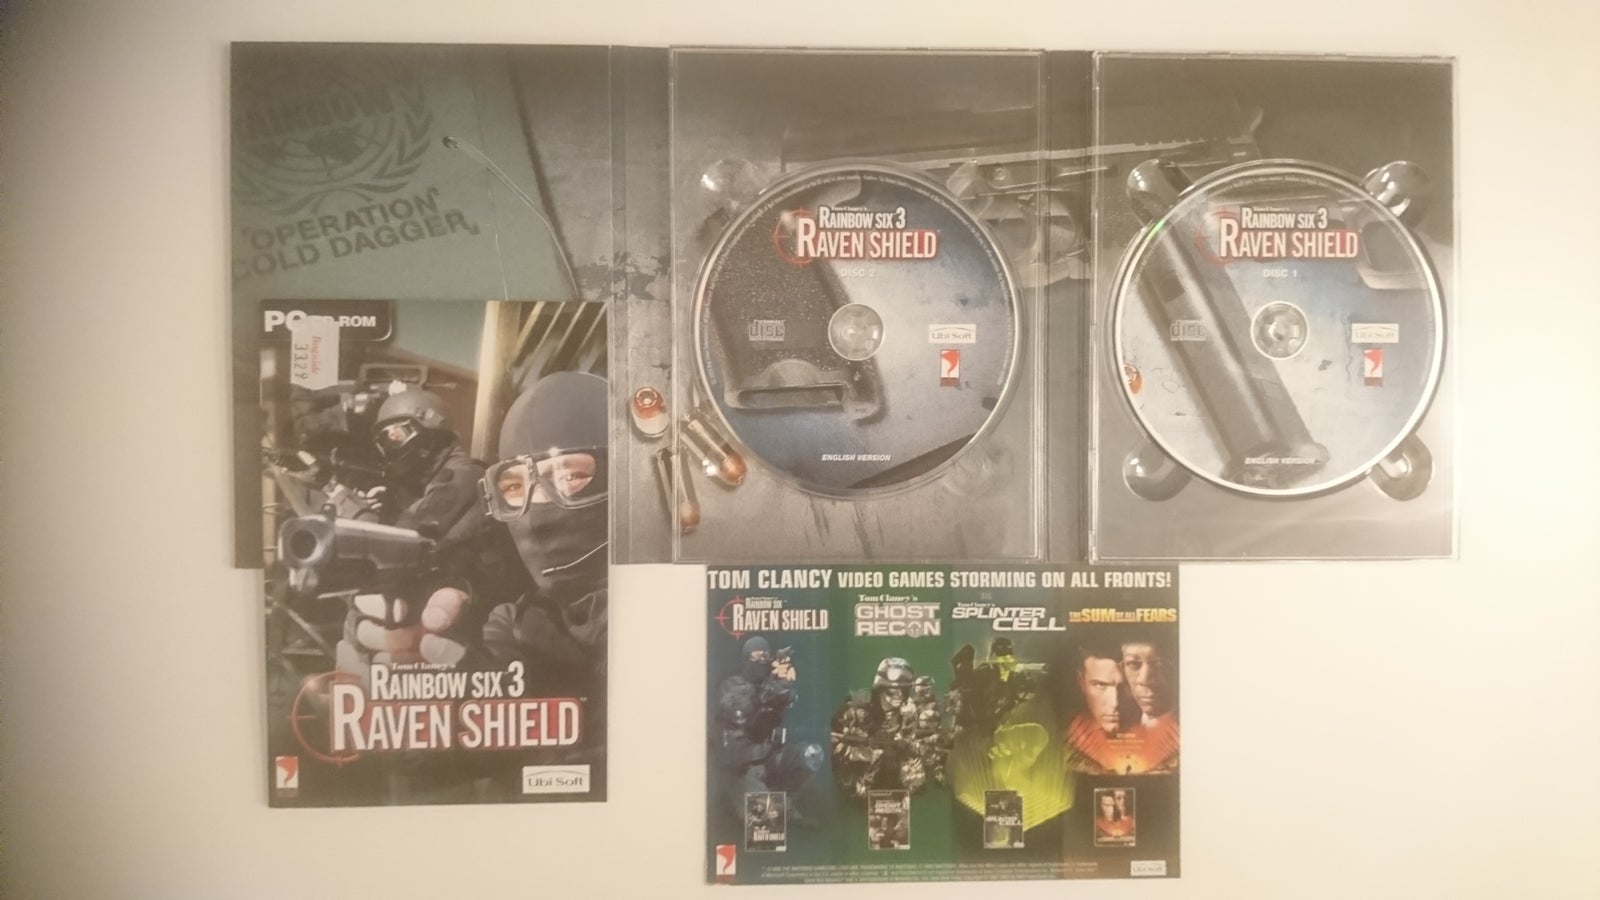 Rainbow Six 3 - Raven Shield, til pc, First person shooter